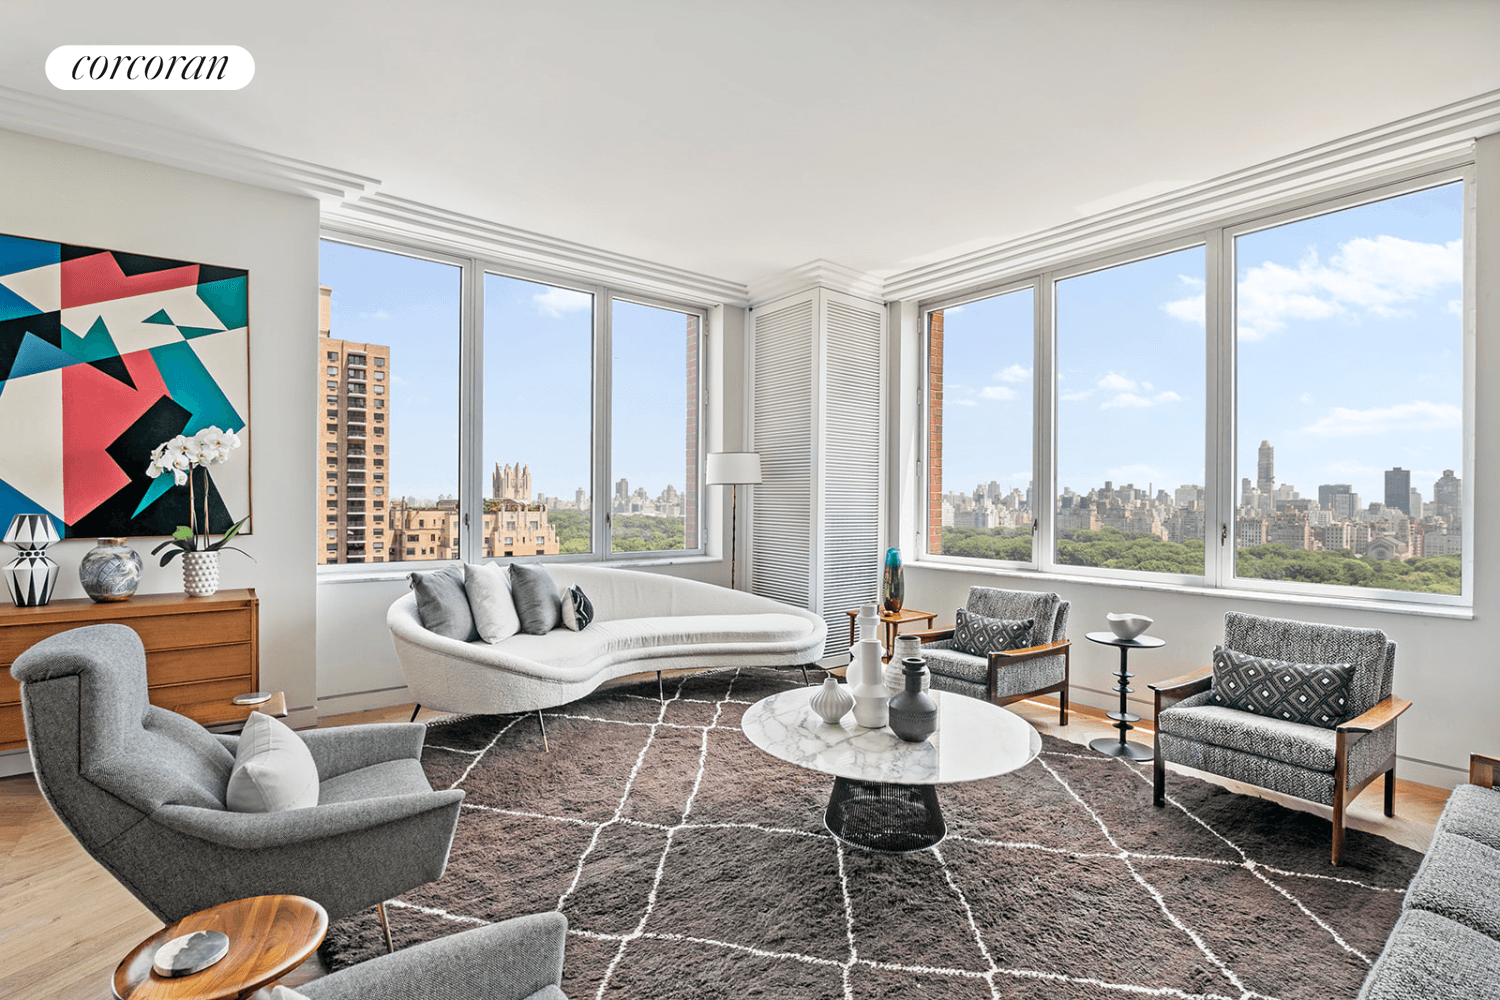 Take in the beauty of Central Park from this magnificent home !